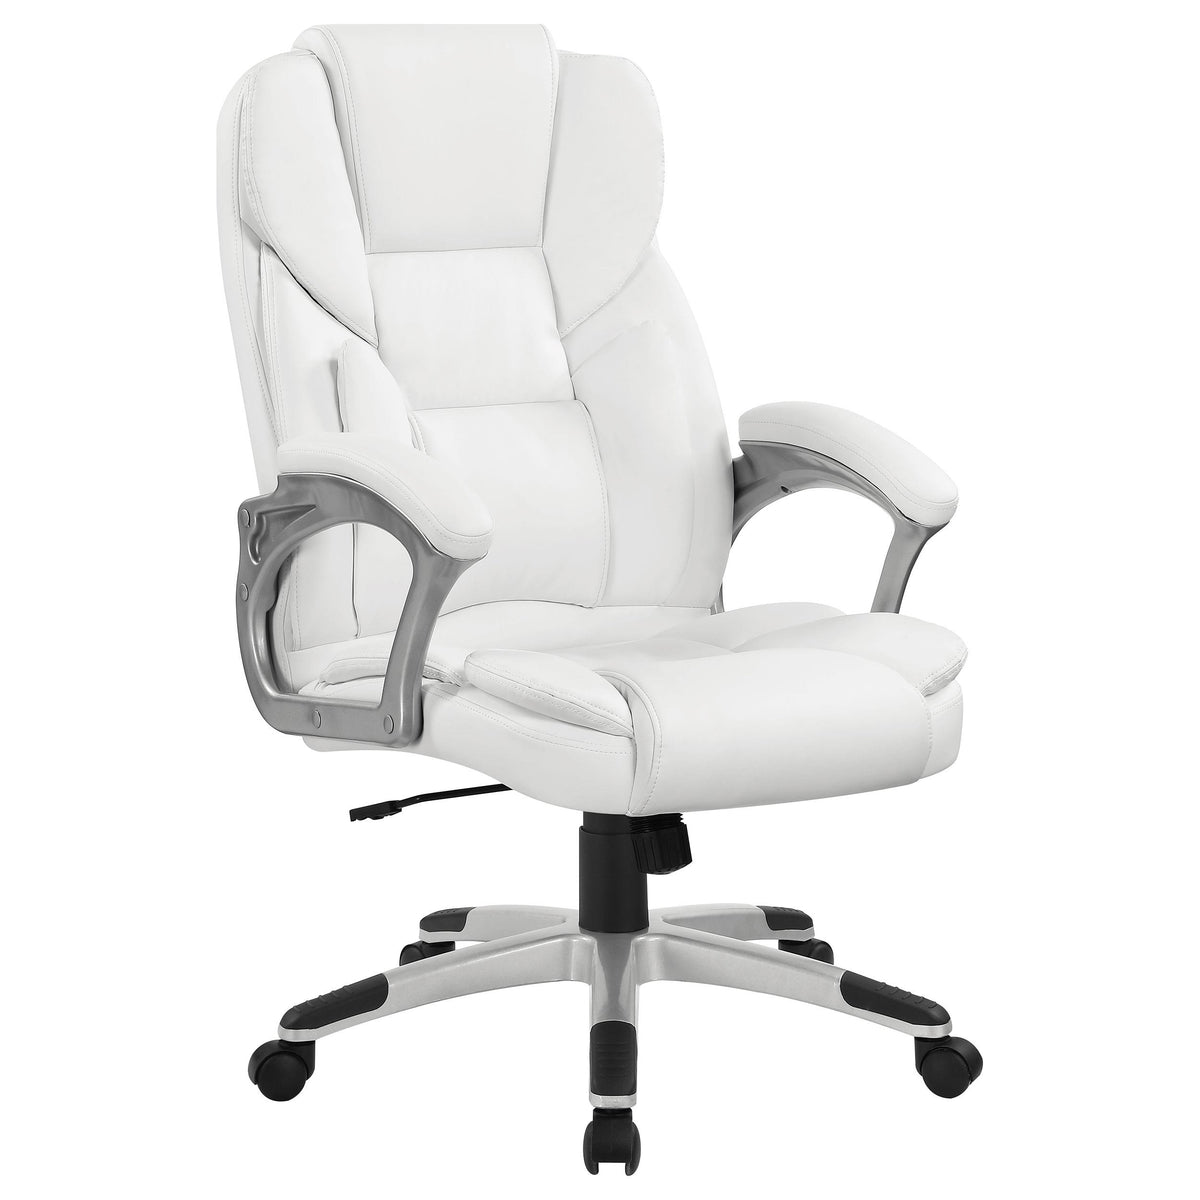 Kaffir Adjustable Height Office Chair White and Silver Kaffir Adjustable Height Office Chair White and Silver Half Price Furniture